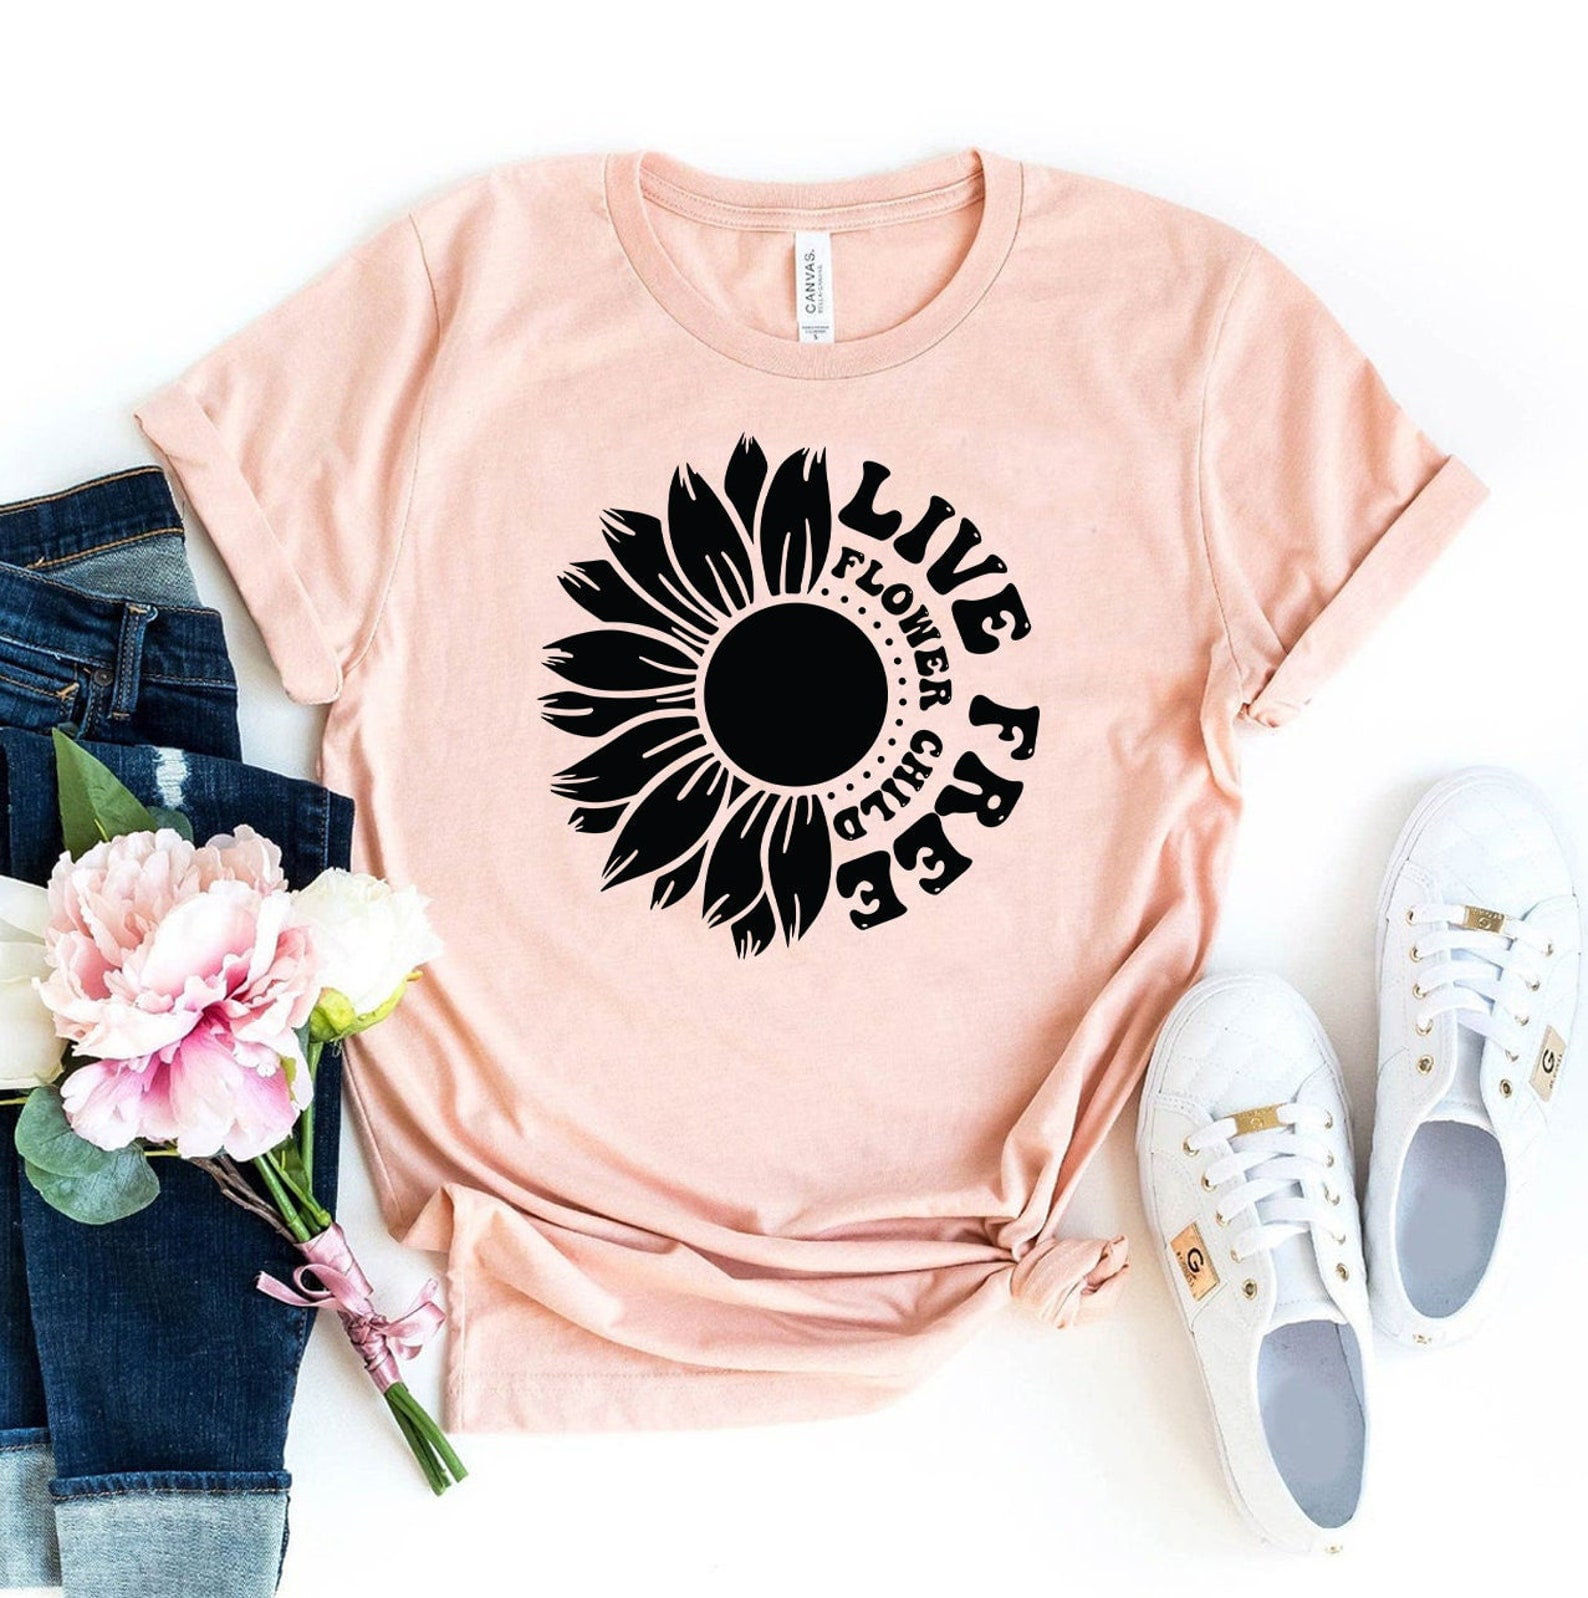 Live Free Flower Child T-shirt Summer Shirt Wild Tee Spirit Top Reading  Gift Hippie Positive Inspirational Groovy Retro Psychedelic Power